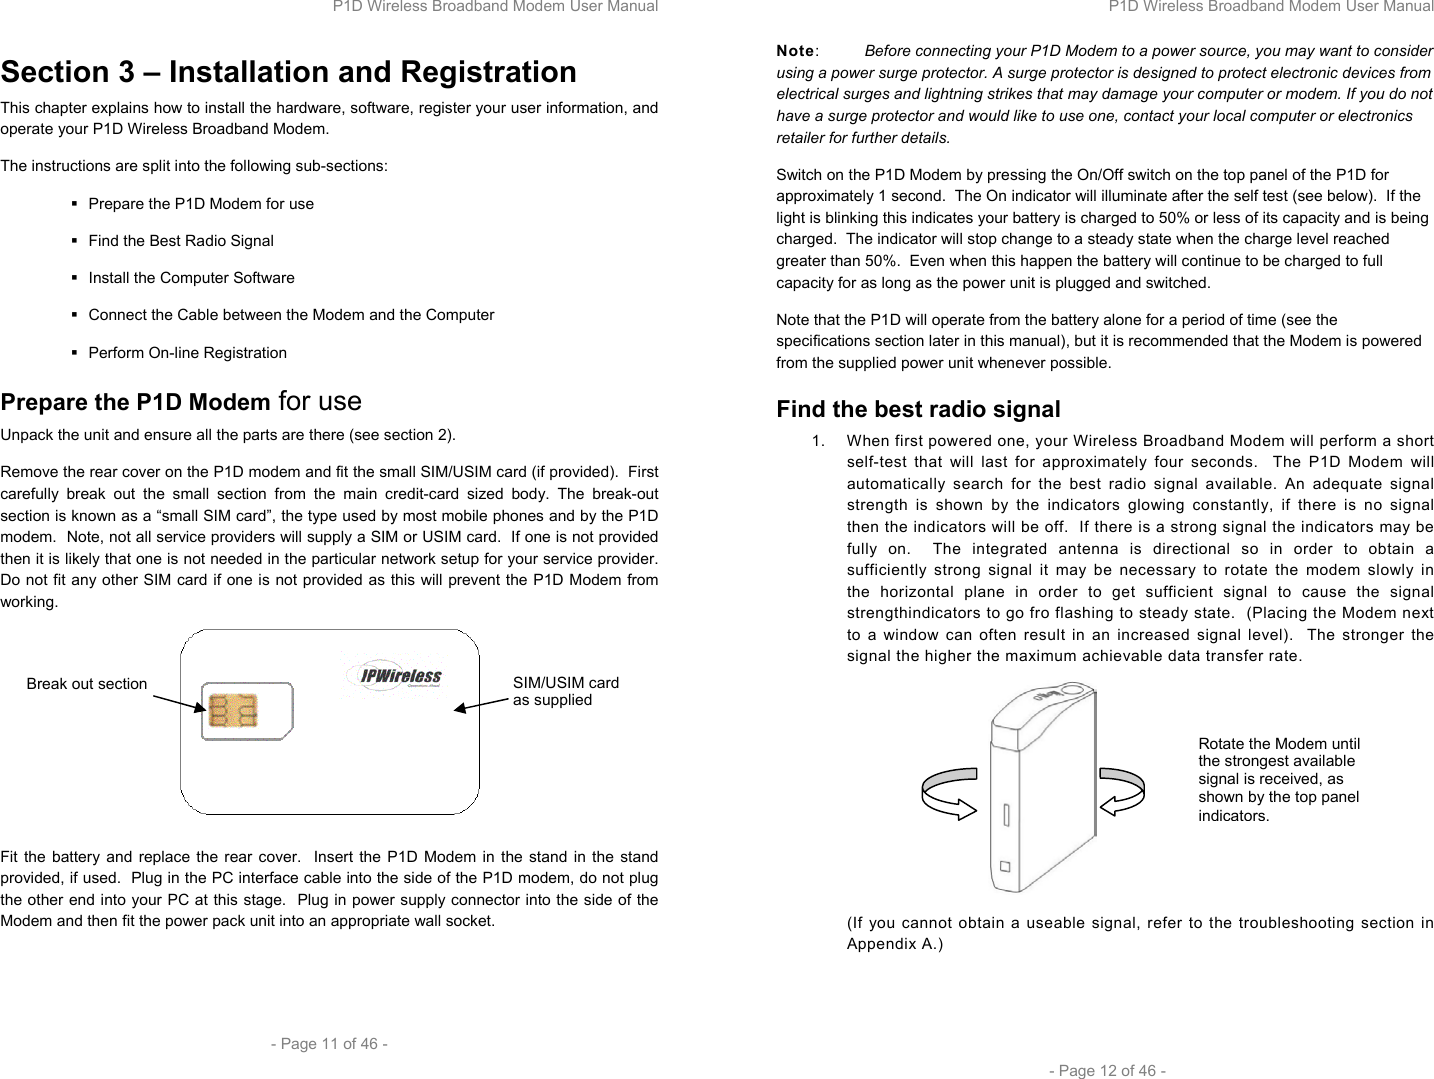 P1D Wireless Broadband Modem User Manual  - Page 11 of 46 -  Section 3 – Installation and Registration This chapter explains how to install the hardware, software, register your user information, and operate your P1D Wireless Broadband Modem.  The instructions are split into the following sub-sections:   Prepare the P1D Modem for use   Find the Best Radio Signal   Install the Computer Software    Connect the Cable between the Modem and the Computer  Perform On-line Registration Prepare the P1D Modem for use Unpack the unit and ensure all the parts are there (see section 2). Remove the rear cover on the P1D modem and fit the small SIM/USIM card (if provided).  First carefully break out the small section from the main credit-card sized body. The break-out section is known as a “small SIM card”, the type used by most mobile phones and by the P1D modem.  Note, not all service providers will supply a SIM or USIM card.  If one is not provided then it is likely that one is not needed in the particular network setup for your service provider.  Do not fit any other SIM card if one is not provided as this will prevent the P1D Modem from working.   Fit the battery and replace the rear cover.  Insert the P1D Modem in the stand in the stand provided, if used.  Plug in the PC interface cable into the side of the P1D modem, do not plug the other end into your PC at this stage.  Plug in power supply connector into the side of the Modem and then fit the power pack unit into an appropriate wall socket.  SIM/USIM card as supplied Break out section P1D Wireless Broadband Modem User Manual  - Page 12 of 46 - Note:  Before connecting your P1D Modem to a power source, you may want to consider using a power surge protector. A surge protector is designed to protect electronic devices from electrical surges and lightning strikes that may damage your computer or modem. If you do not have a surge protector and would like to use one, contact your local computer or electronics retailer for further details.  Switch on the P1D Modem by pressing the On/Off switch on the top panel of the P1D for approximately 1 second.  The On indicator will illuminate after the self test (see below).  If the light is blinking this indicates your battery is charged to 50% or less of its capacity and is being charged.  The indicator will stop change to a steady state when the charge level reached greater than 50%.  Even when this happen the battery will continue to be charged to full capacity for as long as the power unit is plugged and switched. Note that the P1D will operate from the battery alone for a period of time (see the specifications section later in this manual), but it is recommended that the Modem is powered from the supplied power unit whenever possible. Find the best radio signal 1.  When first powered one, your Wireless Broadband Modem will perform a short self-test that will last for approximately four seconds.  The P1D Modem will automatically search for the best radio signal available. An adequate signal strength is shown by the indicators glowing constantly, if there is no signal then the indicators will be off.  If there is a strong signal the indicators may be fully on.  The integrated antenna is directional so in order to obtain a sufficiently strong signal it may be necessary to rotate the modem slowly in the horizontal plane in order to get sufficient signal to cause the signal strengthindicators to go fro flashing to steady state.  (Placing the Modem next to a window can often result in an increased signal level).  The stronger the signal the higher the maximum achievable data transfer rate.  (If you cannot obtain a useable signal, refer to the troubleshooting section in Appendix A.)  Rotate the Modem until the strongest available signal is received, as shown by the top panel indicators.